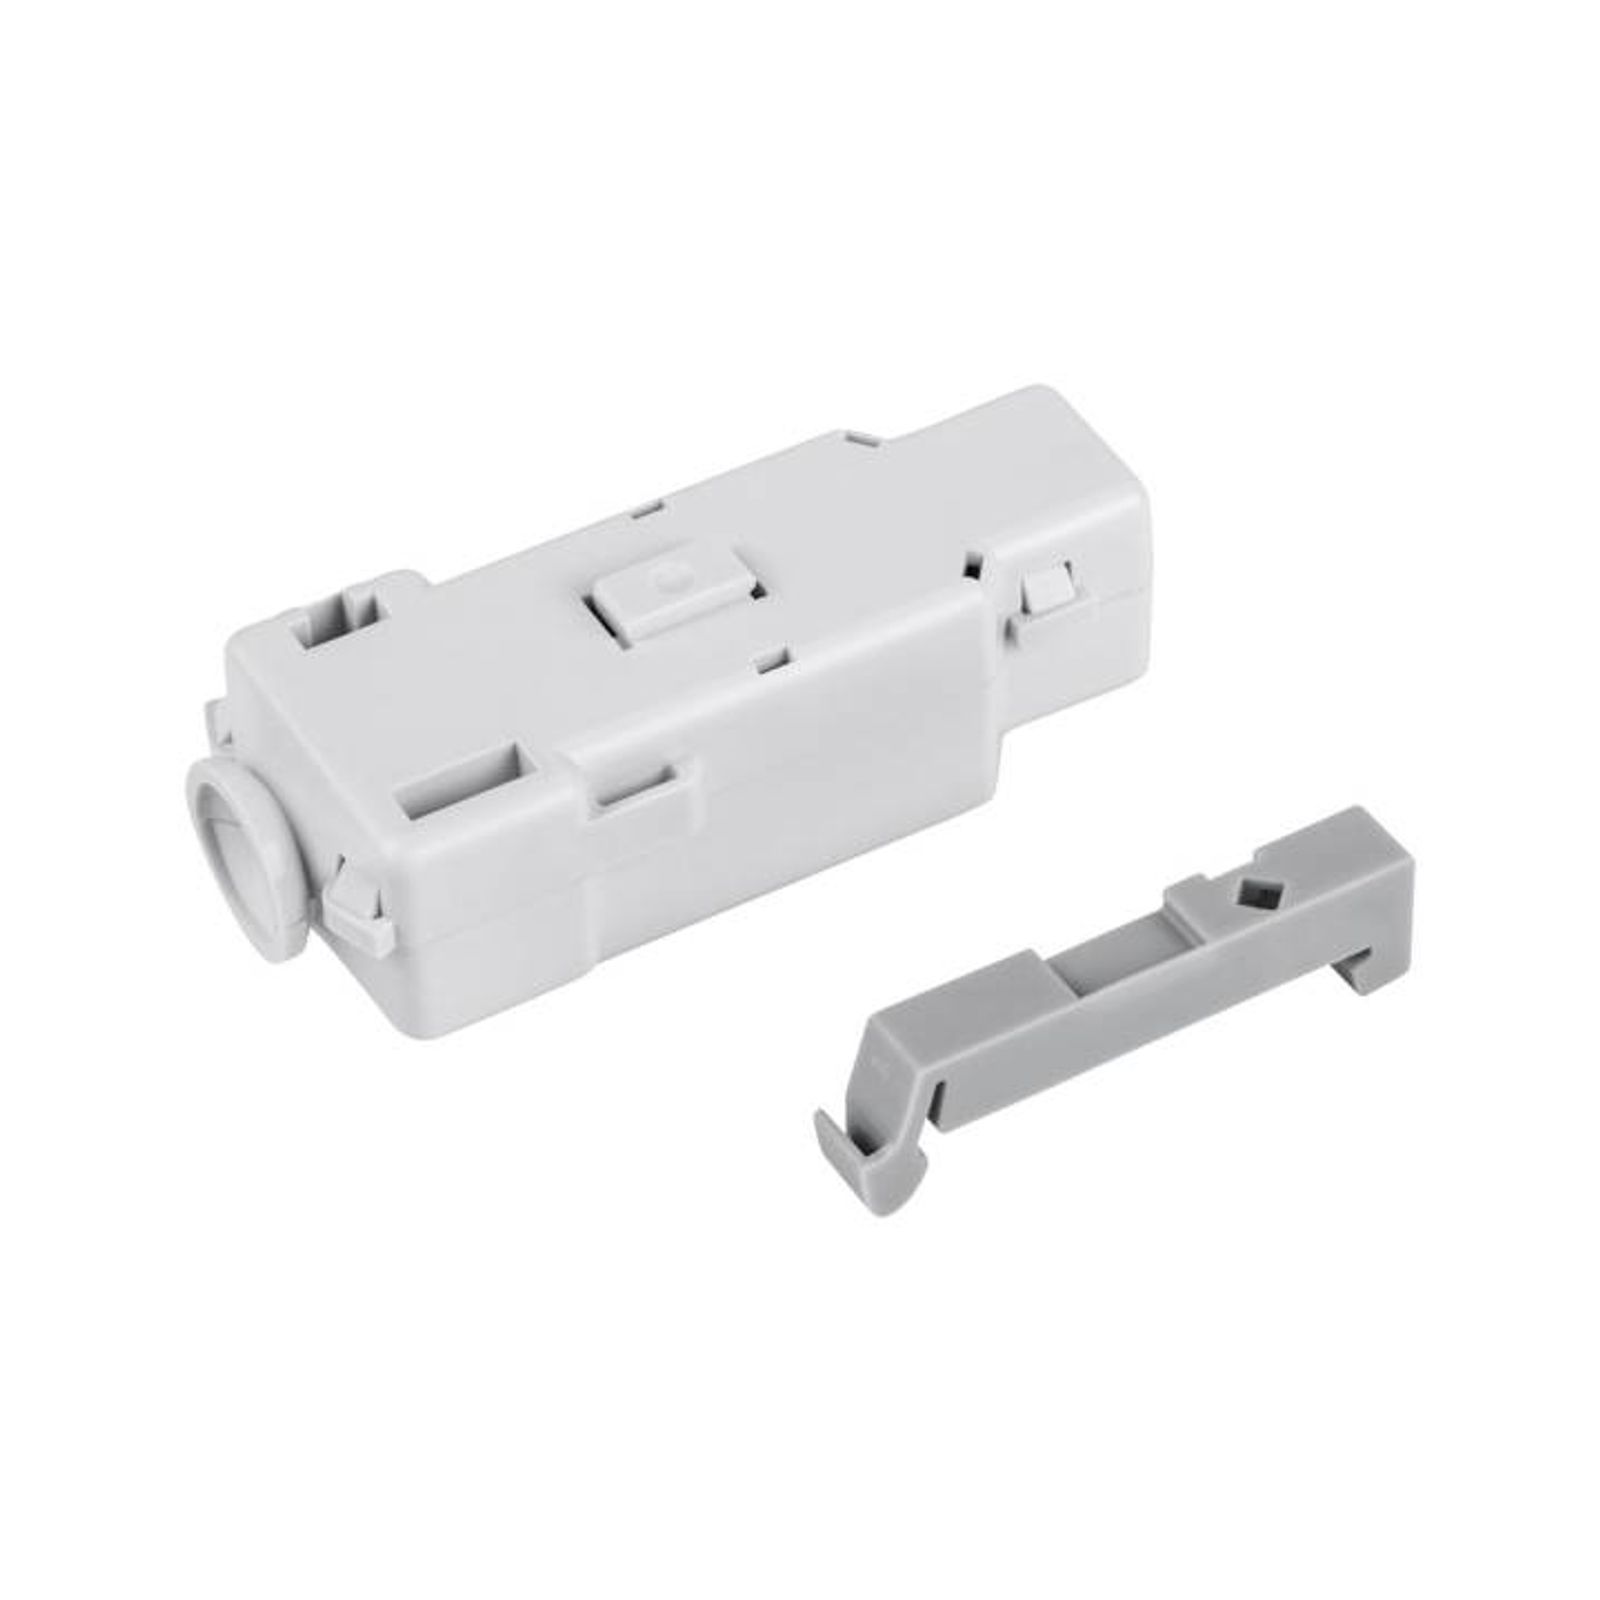 Homematic IP Wired Smart Home Buskabeladapter HmIPW-BCC